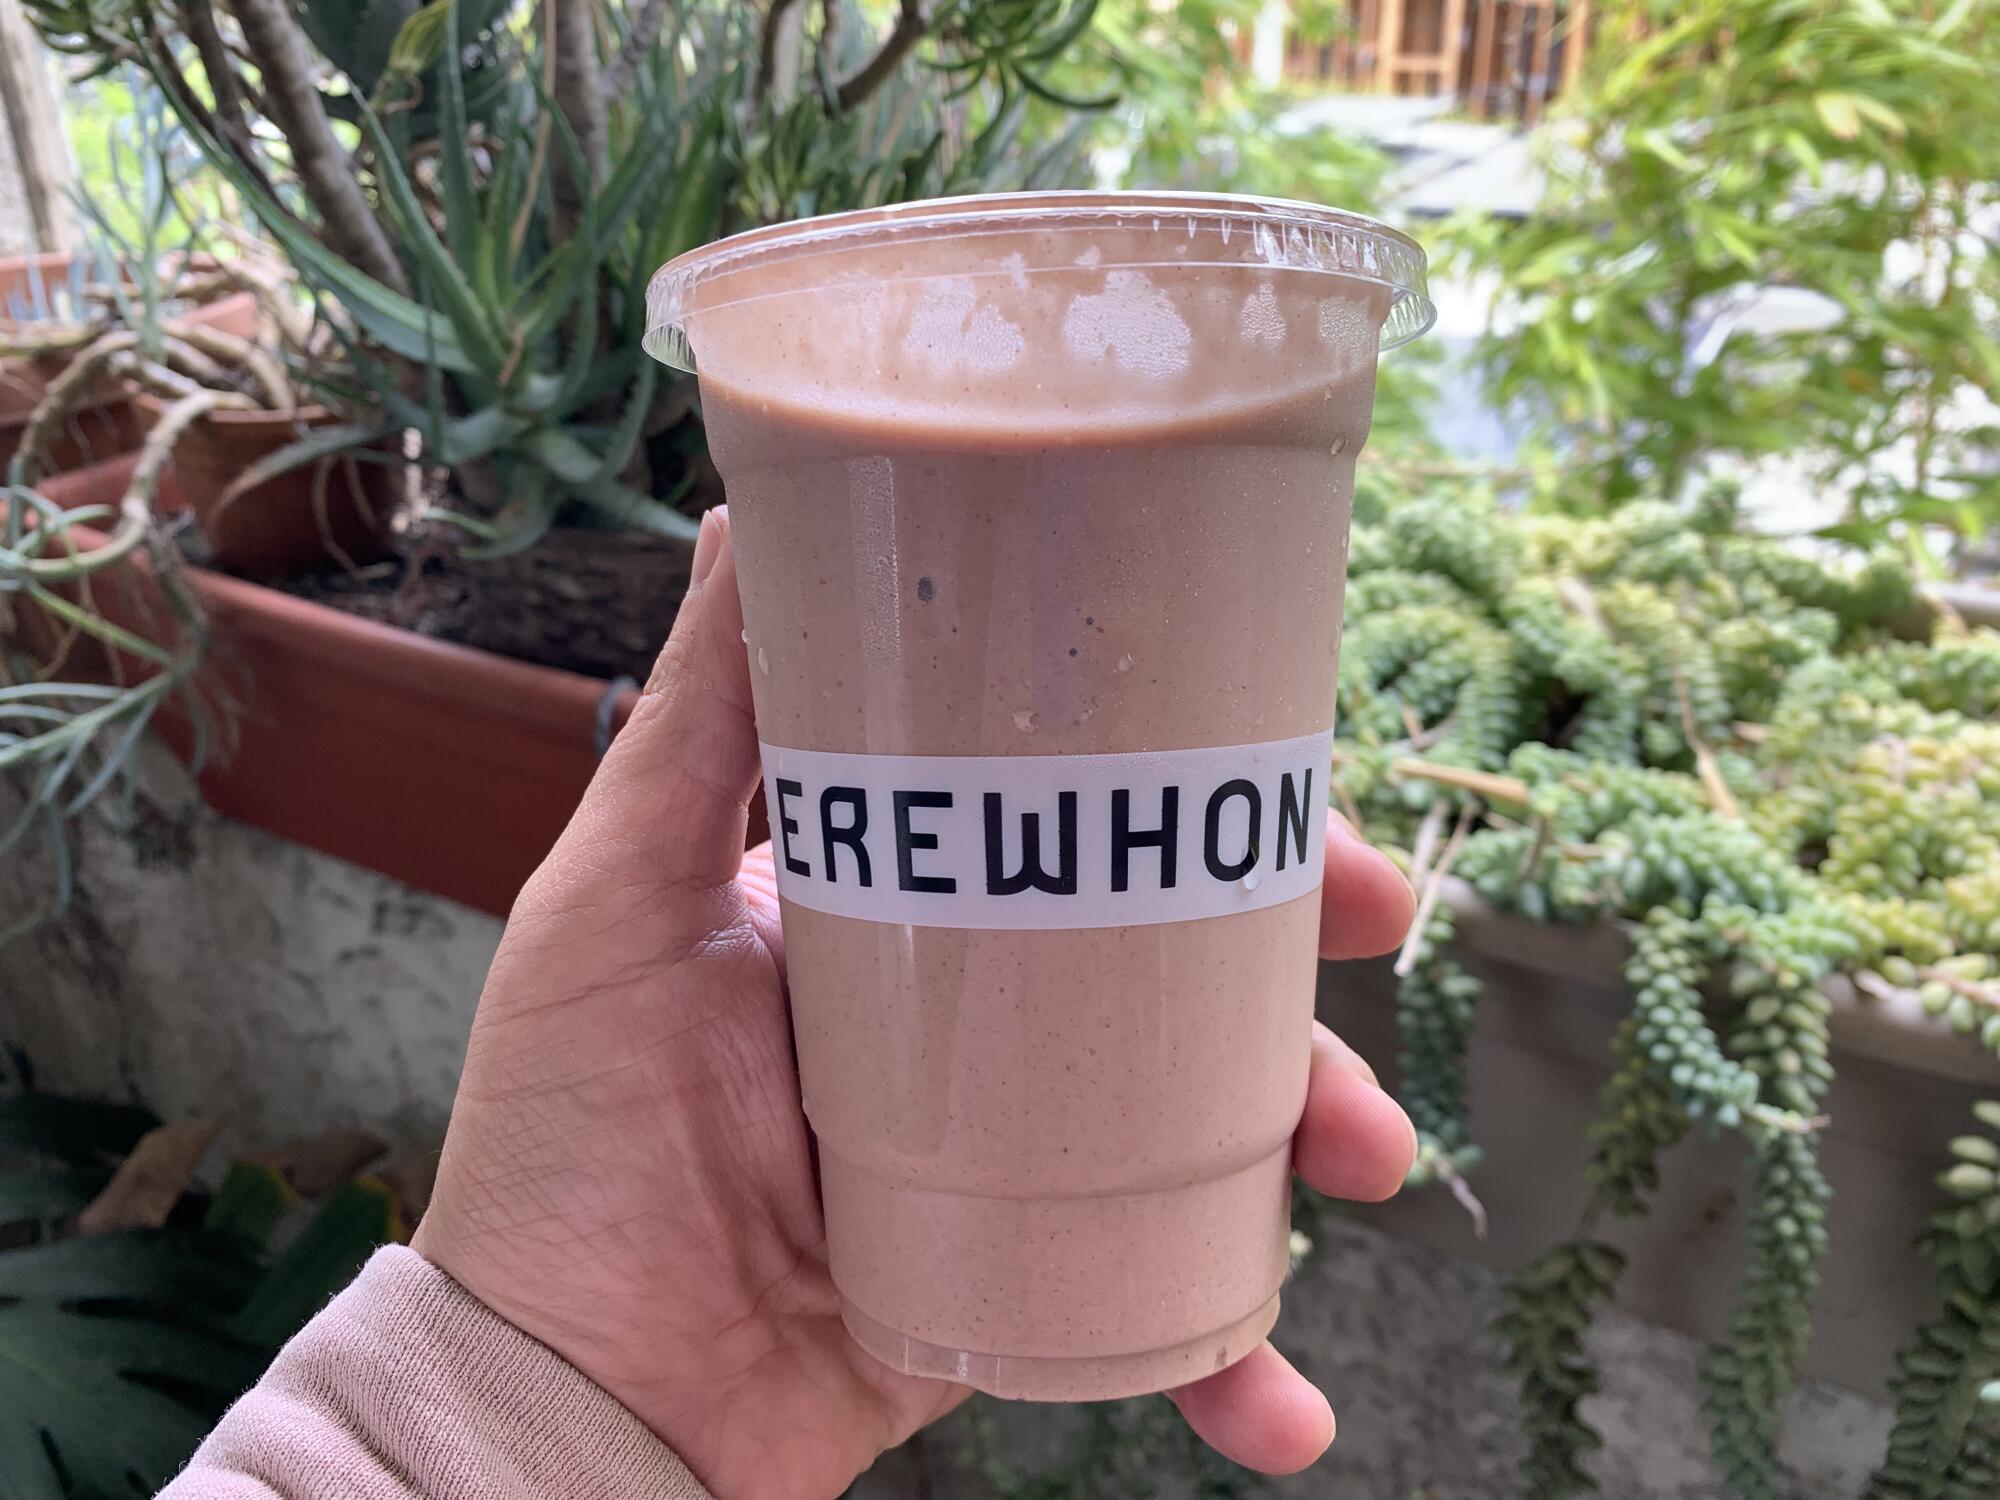 A hand holds a brown smoothie in a plastic cup that says Erewhon.